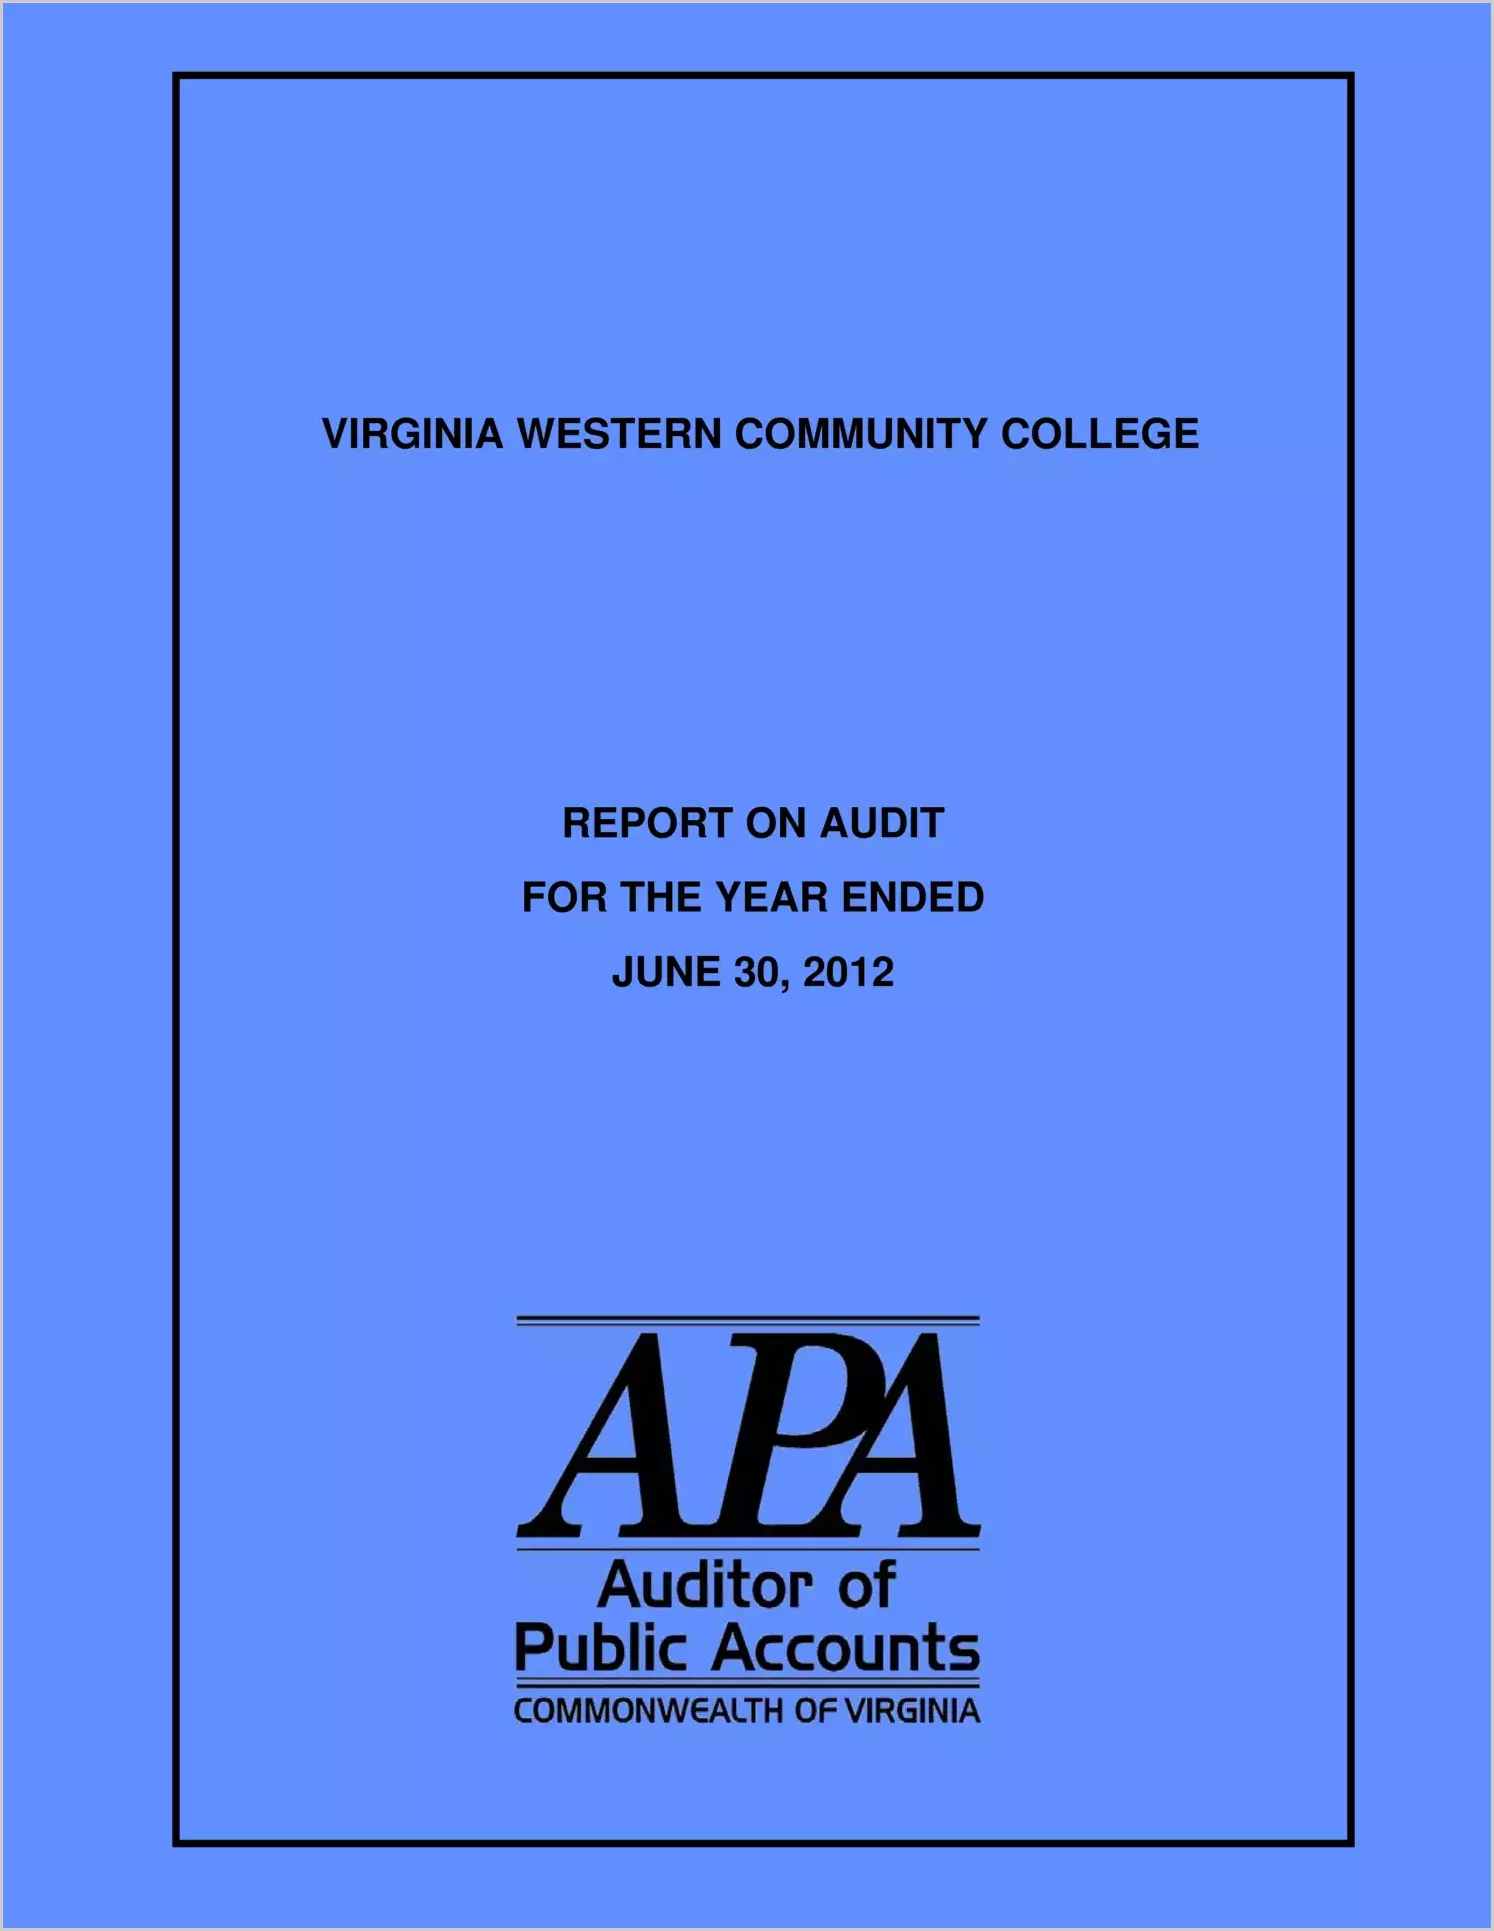 Virginia Western Community College for the year ended June 30, 2012